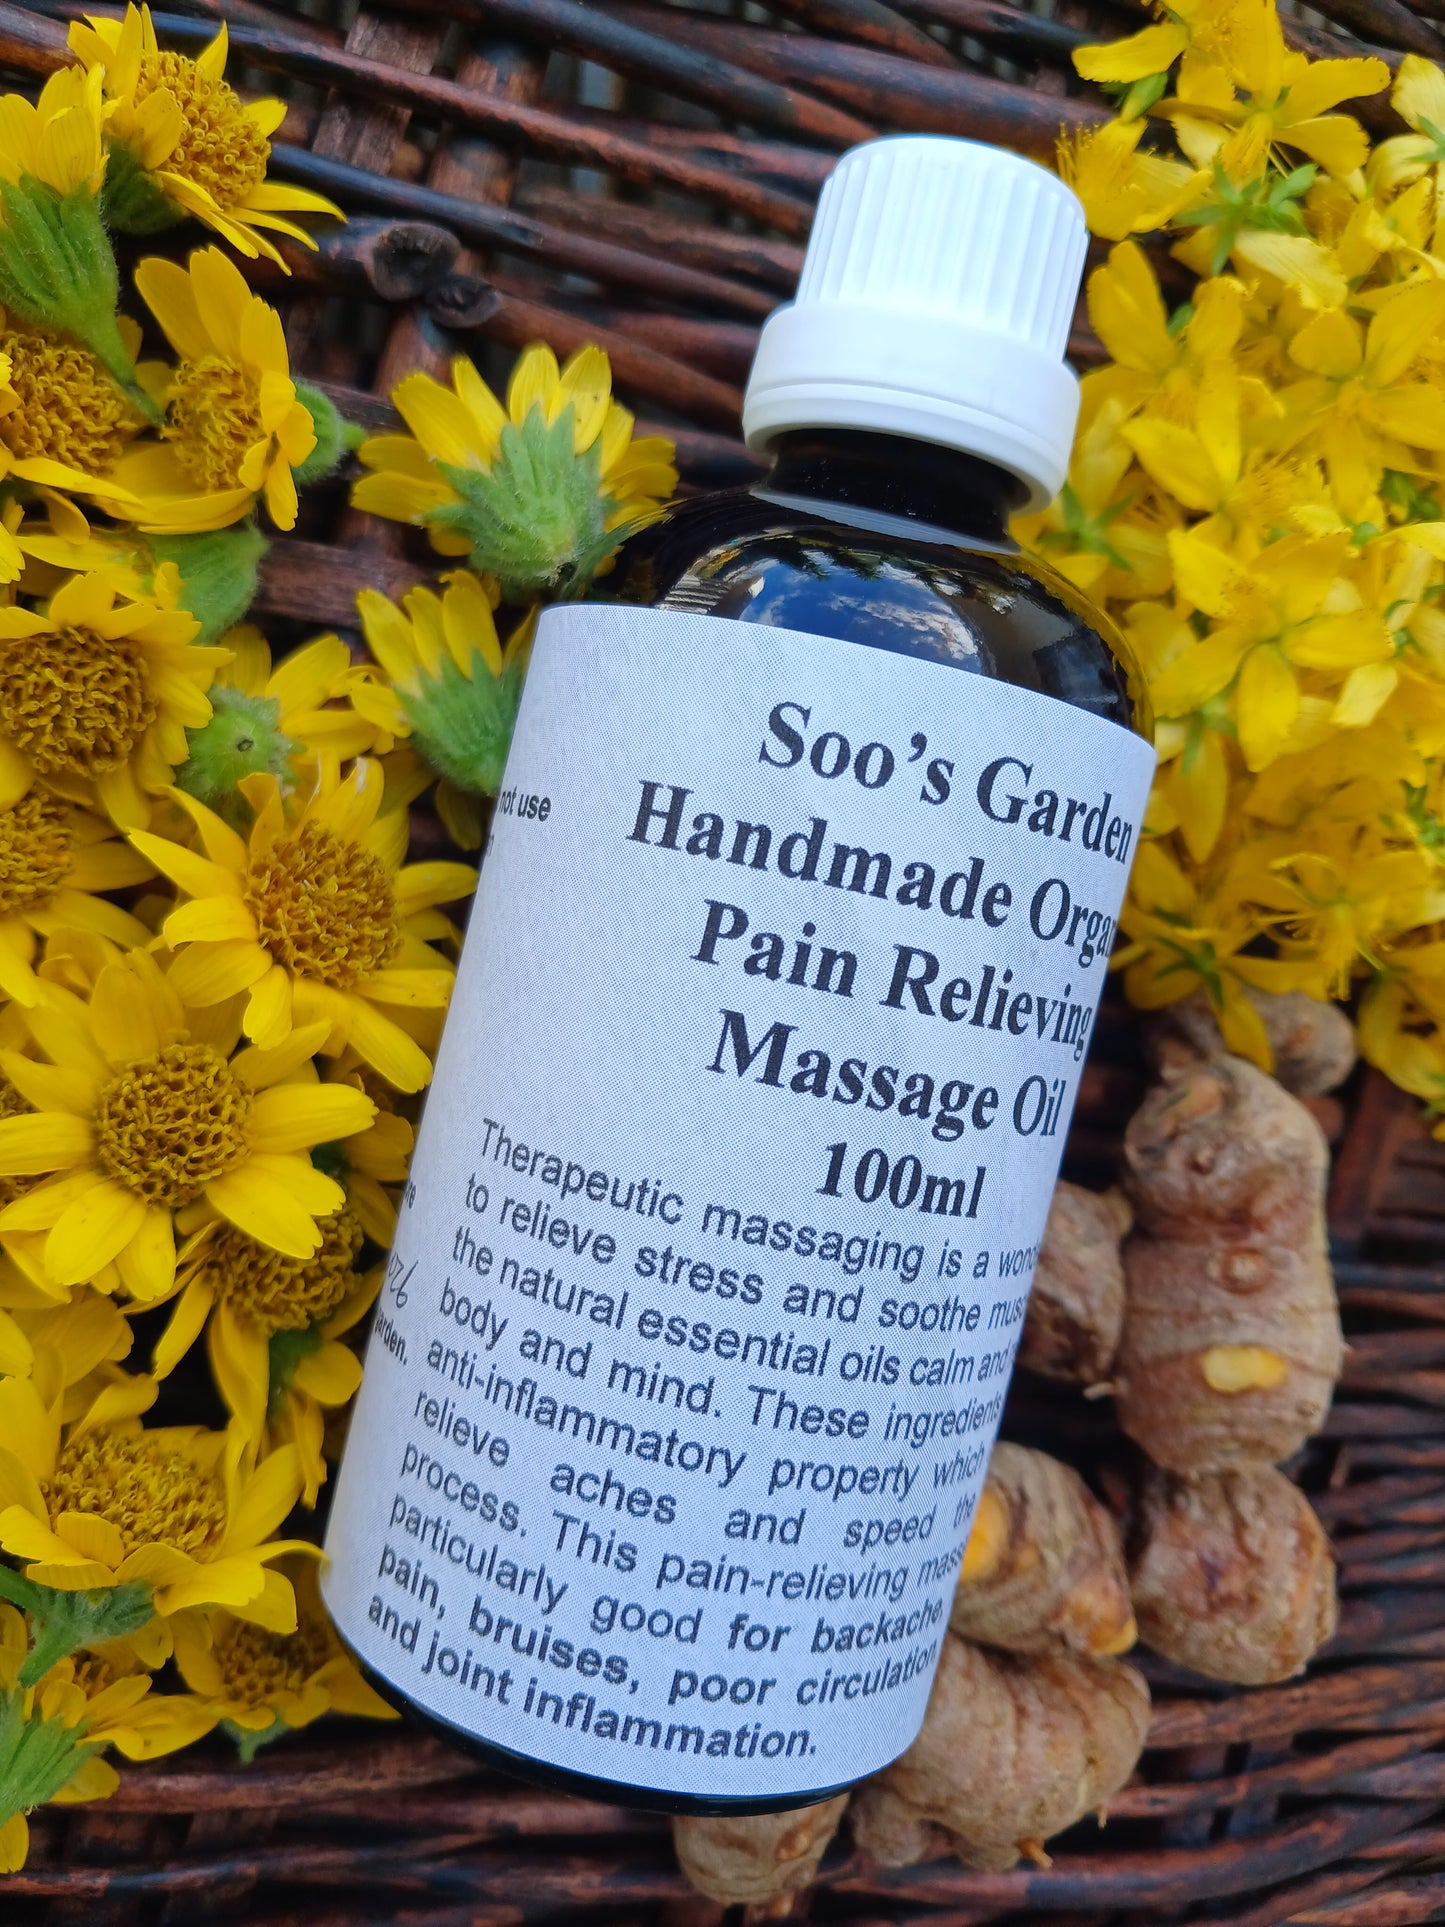 Pain relieving massage oil 100ml